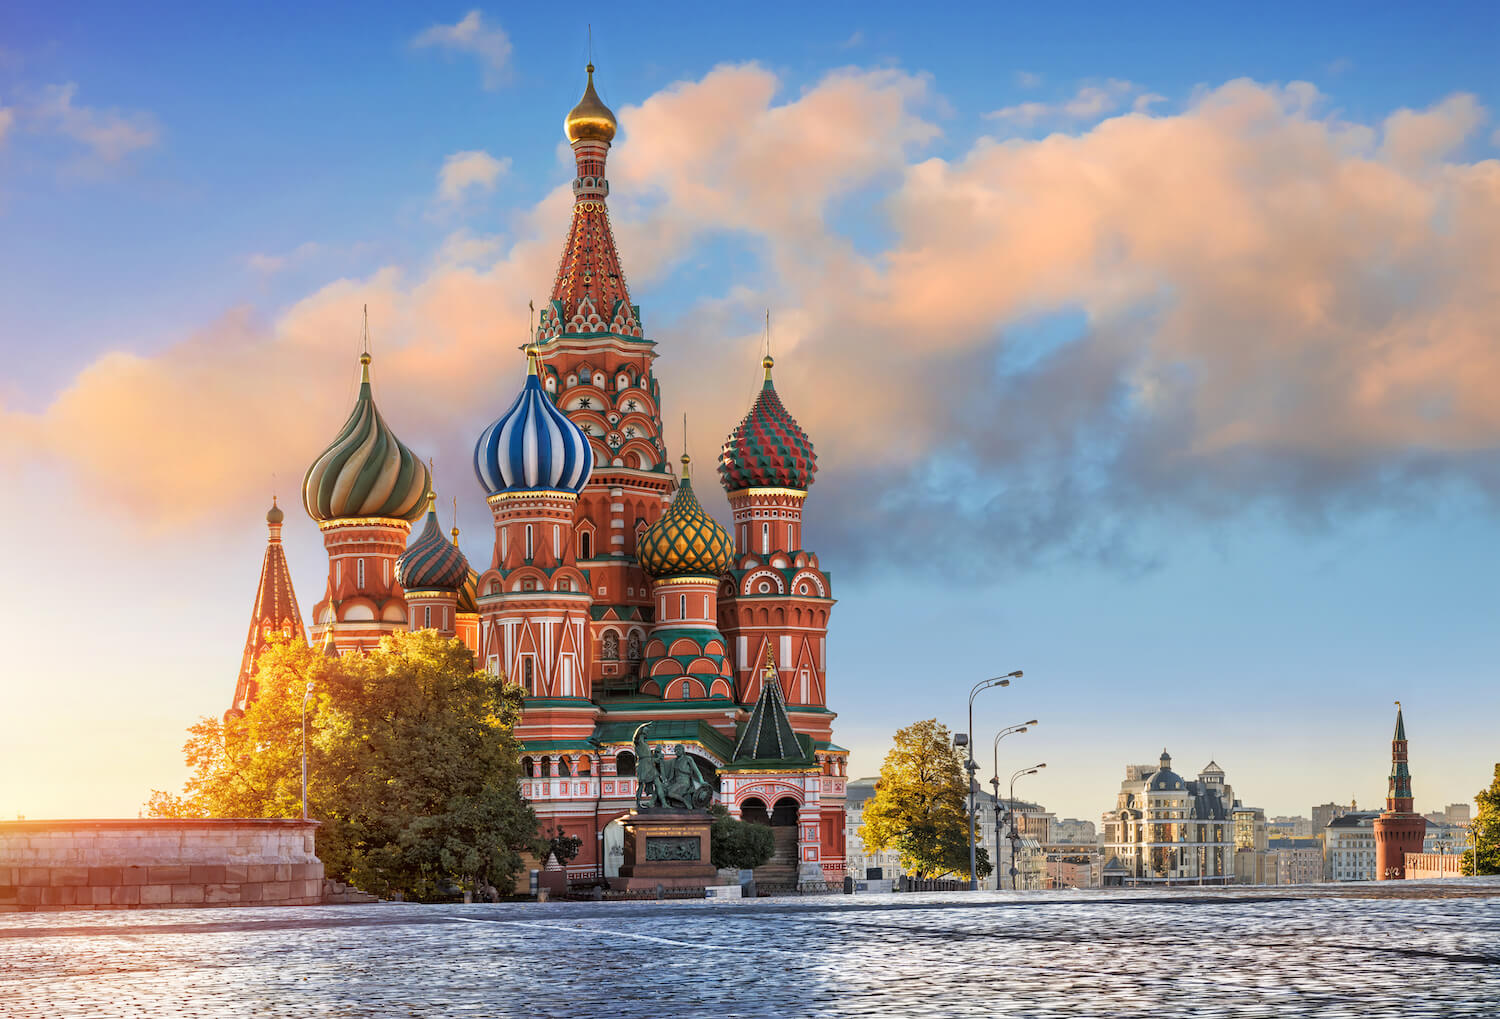 Moscow Dating Saint Basil's Cathedral